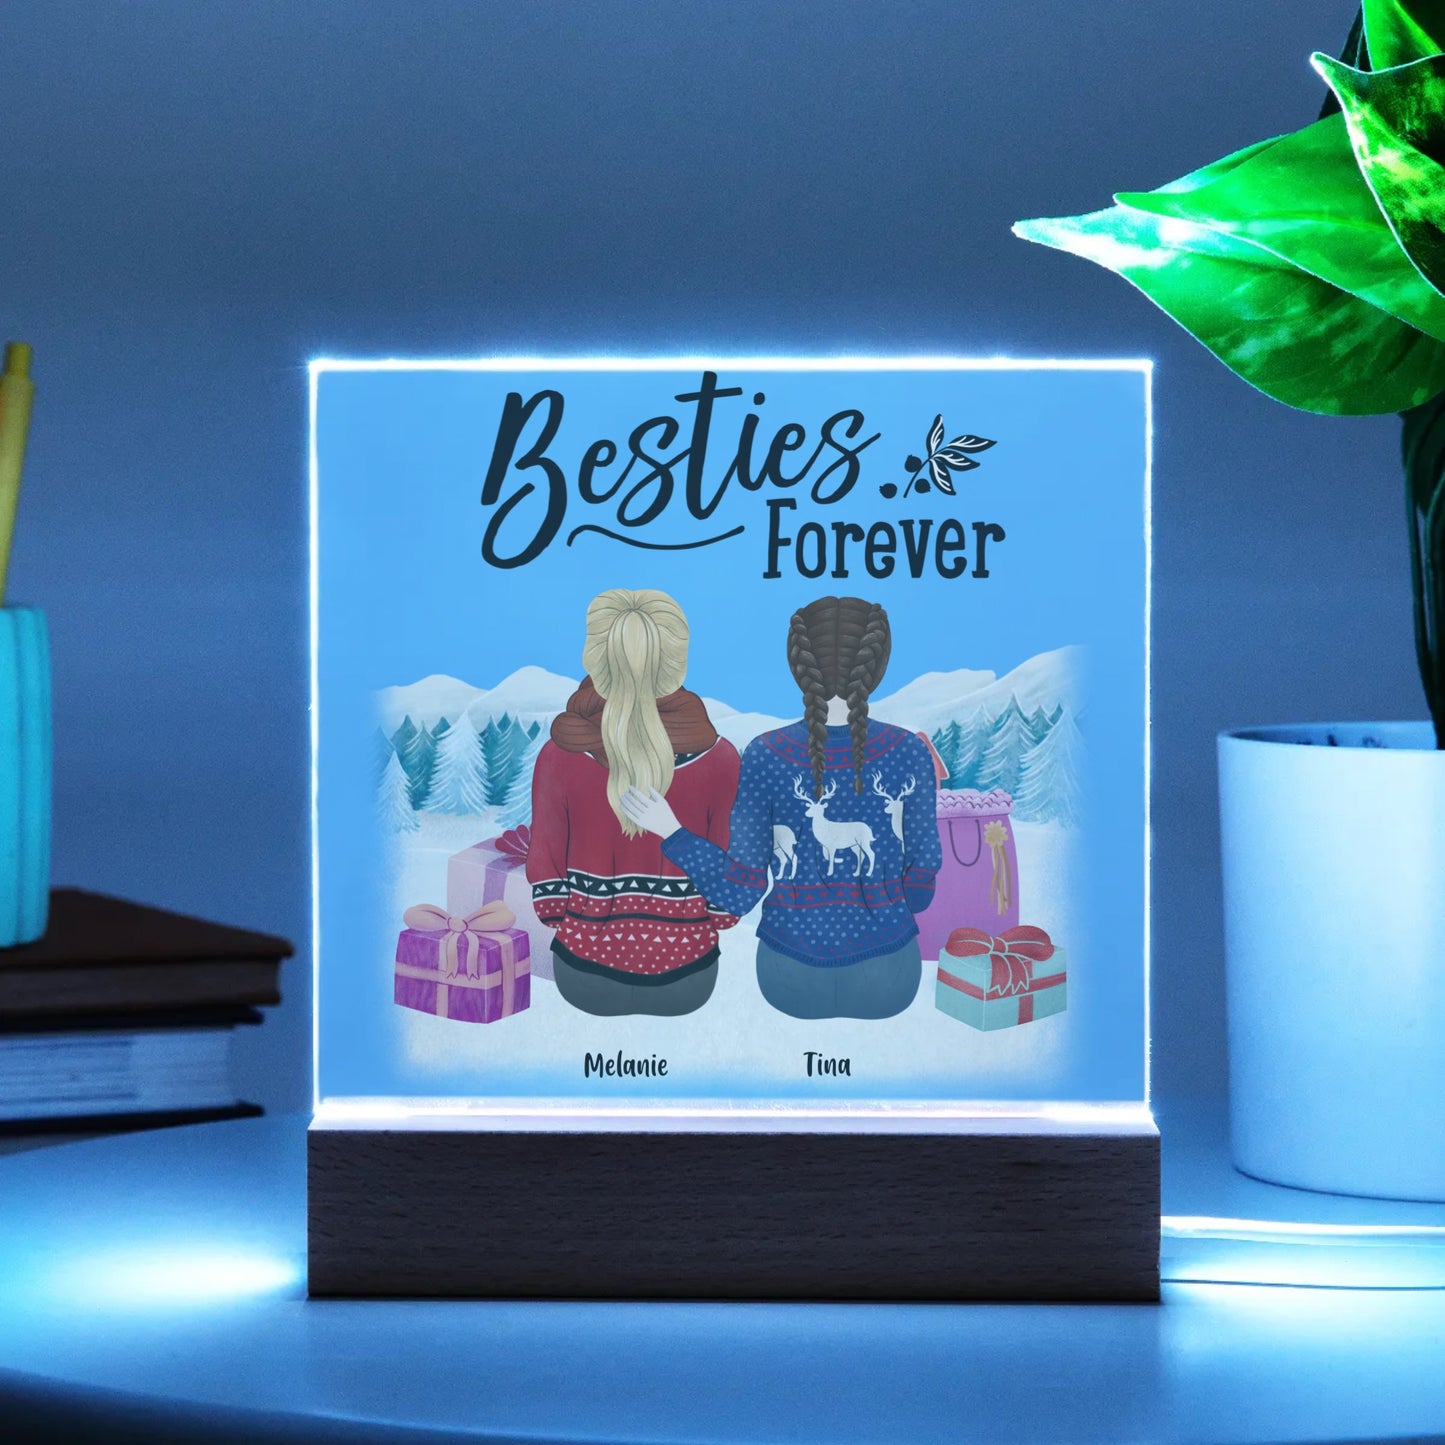 Besties Forever Personalized Acrylic Square Plaque